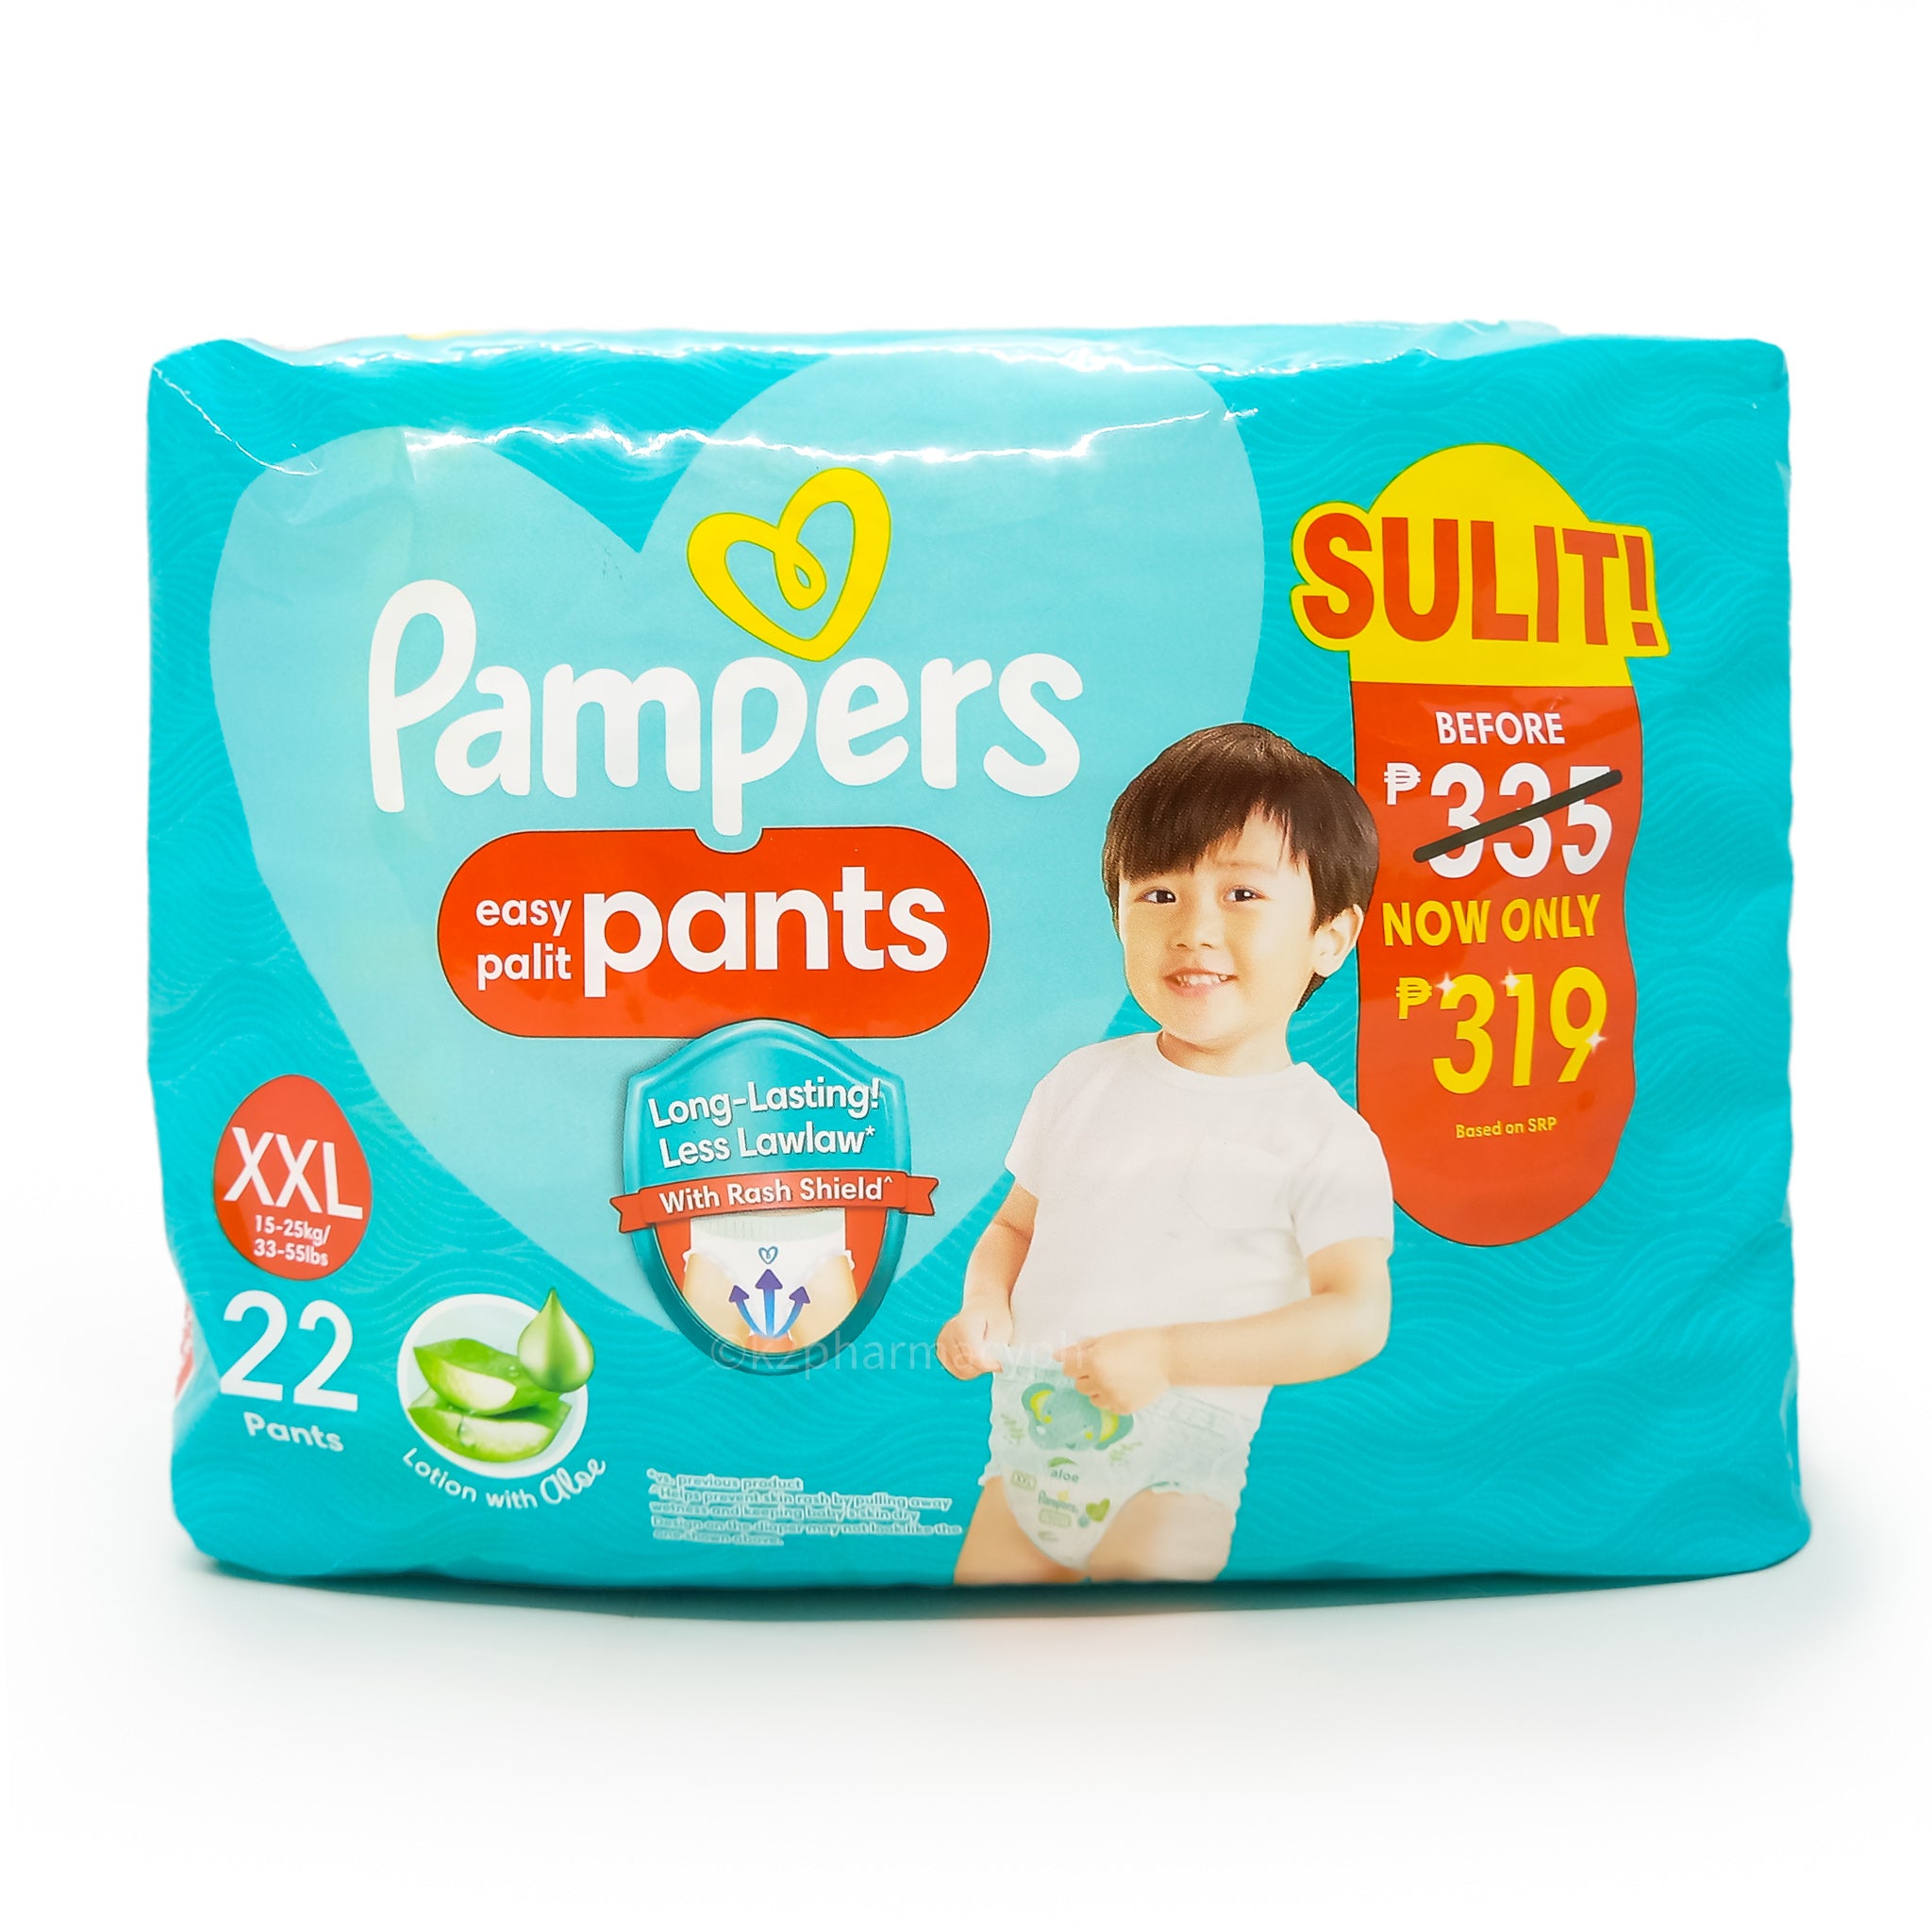 Pampers All-Round Protection Diaper Pants XL, 66 Count | lupon.gov.ph